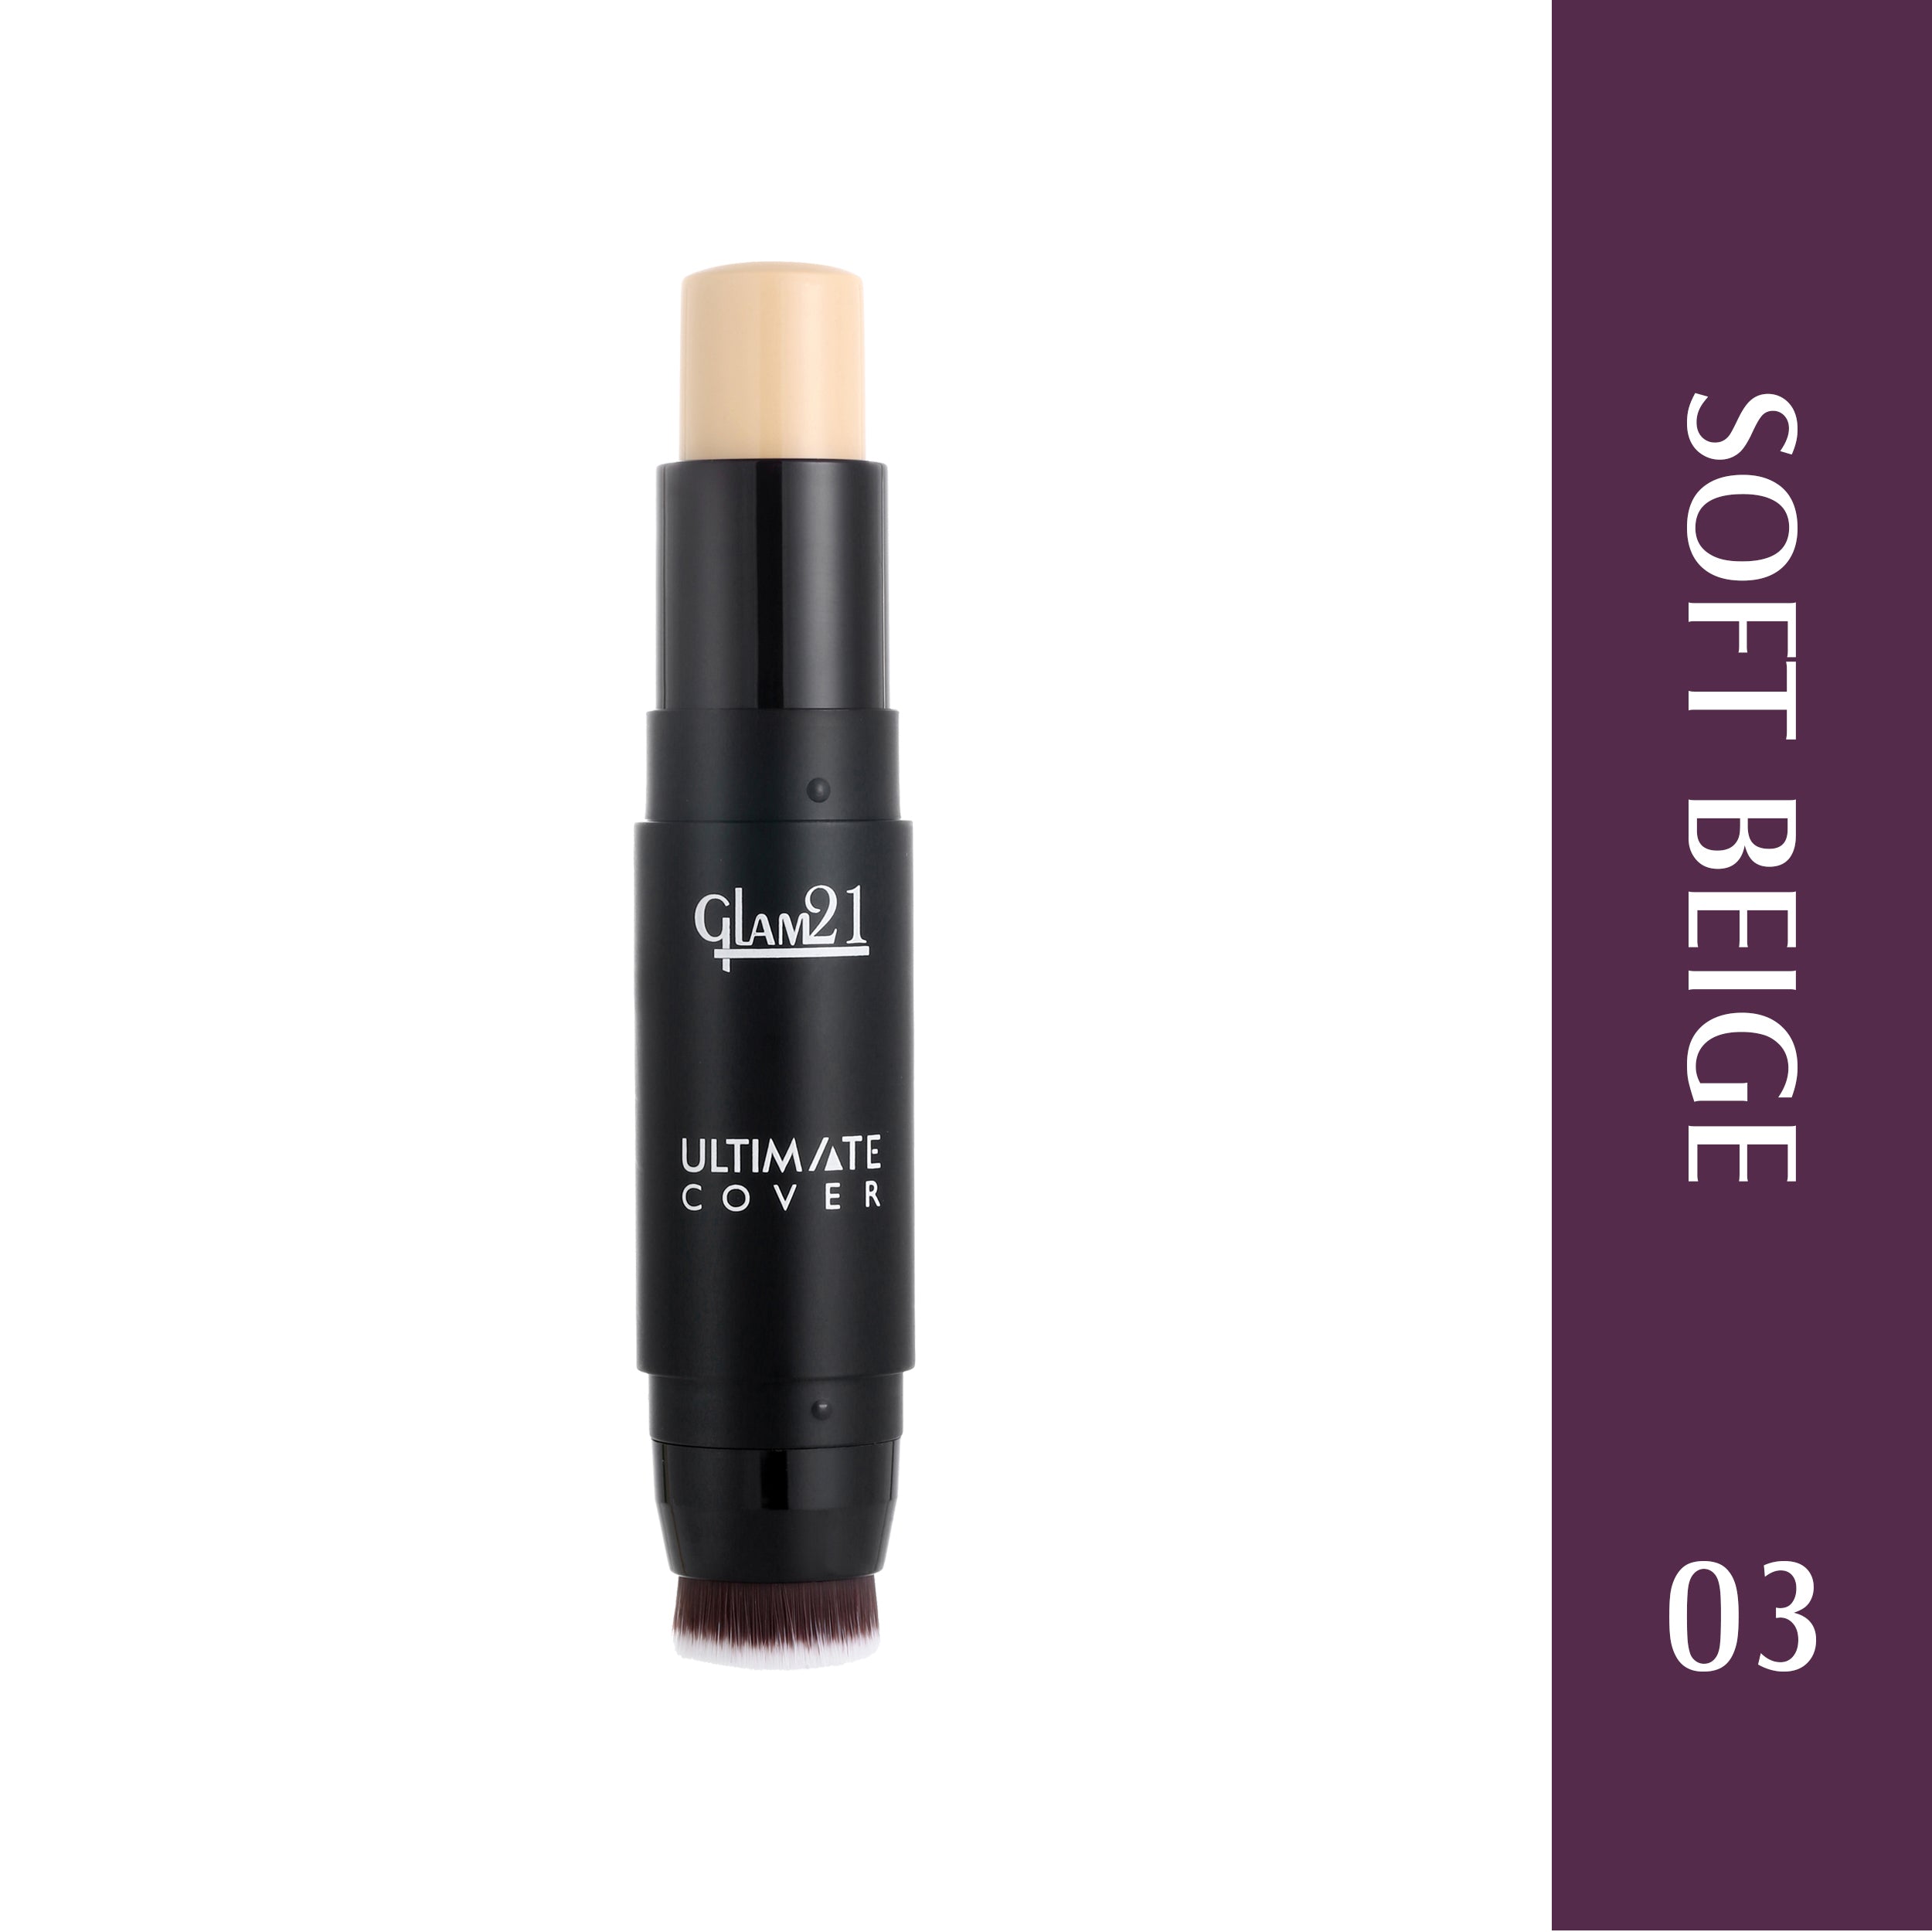 Glam21 Ultimate Cover Foundation Stick Easy to Blend & Gives Matte Finish upto 12 Hours Foundation (03-Soft Beige, 8 g)